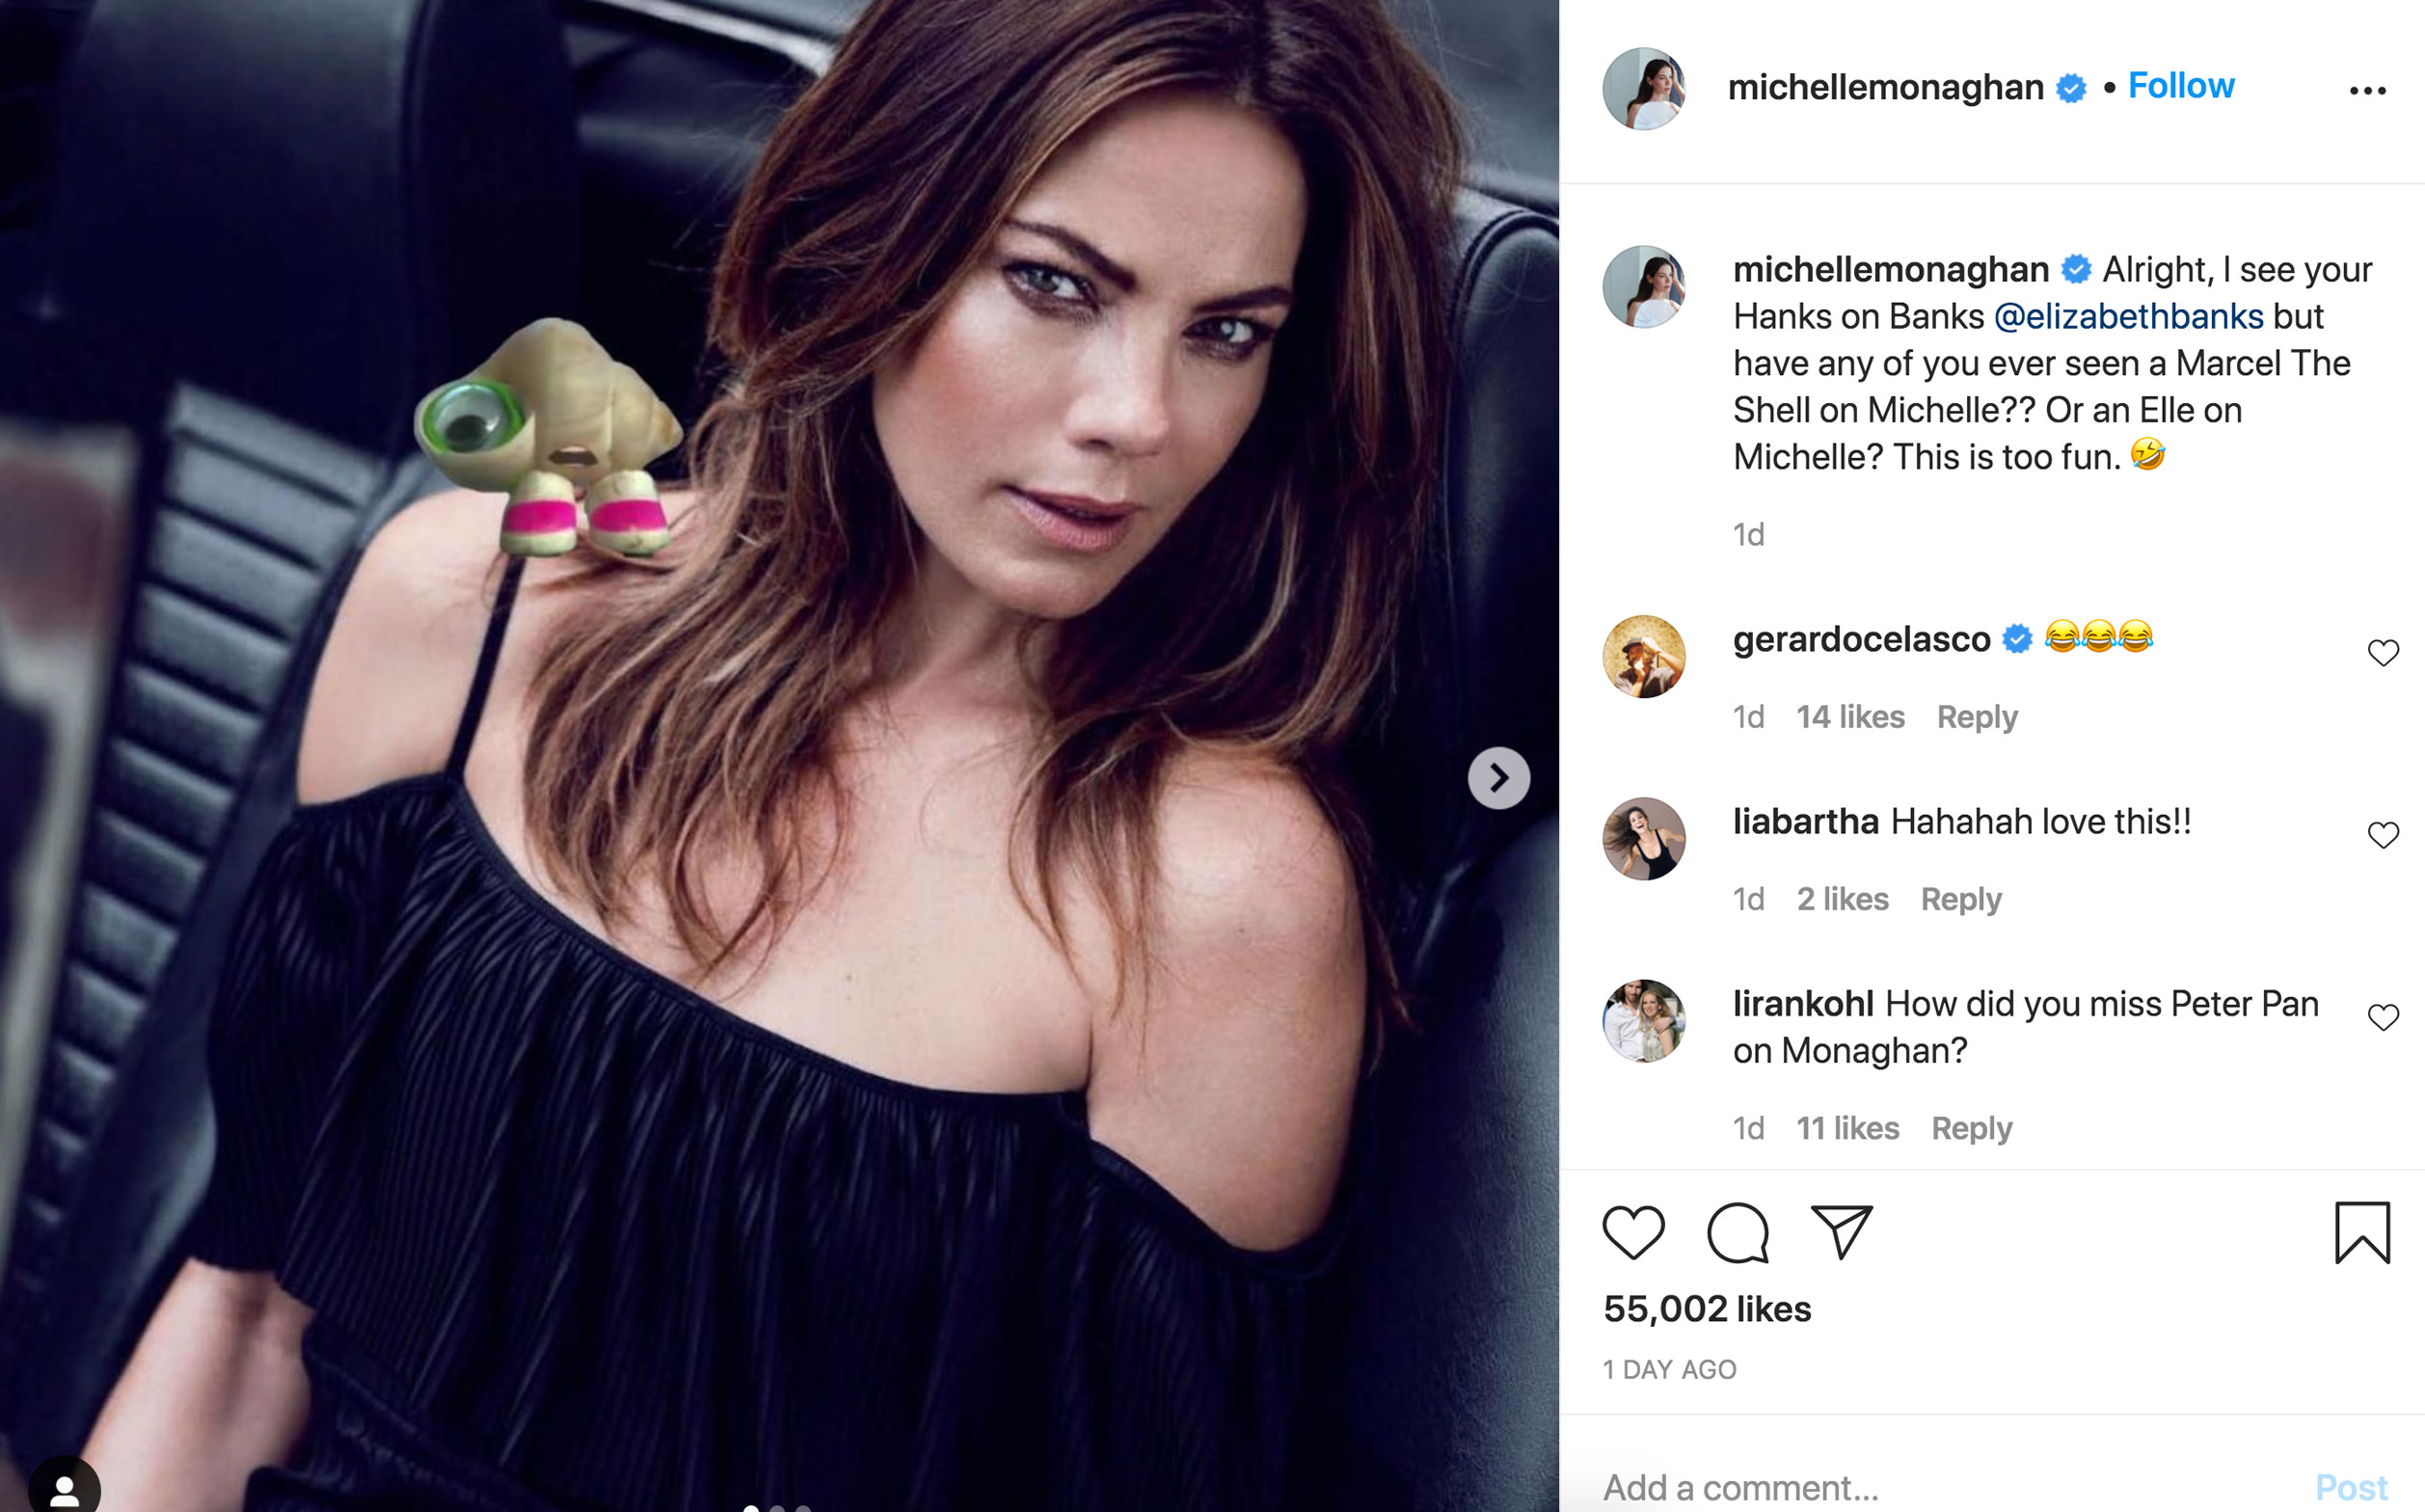 michelle monaghan magazine - michellemonaghan michellemonaghan Alright, I see your Hanks on Banks but have any of you ever seen a Marcel The Shell on Michelle?? Or an Elle on Michelle? This is too fun. 1d gerardocelasco 1d 14 > liabartha Hahahah love this